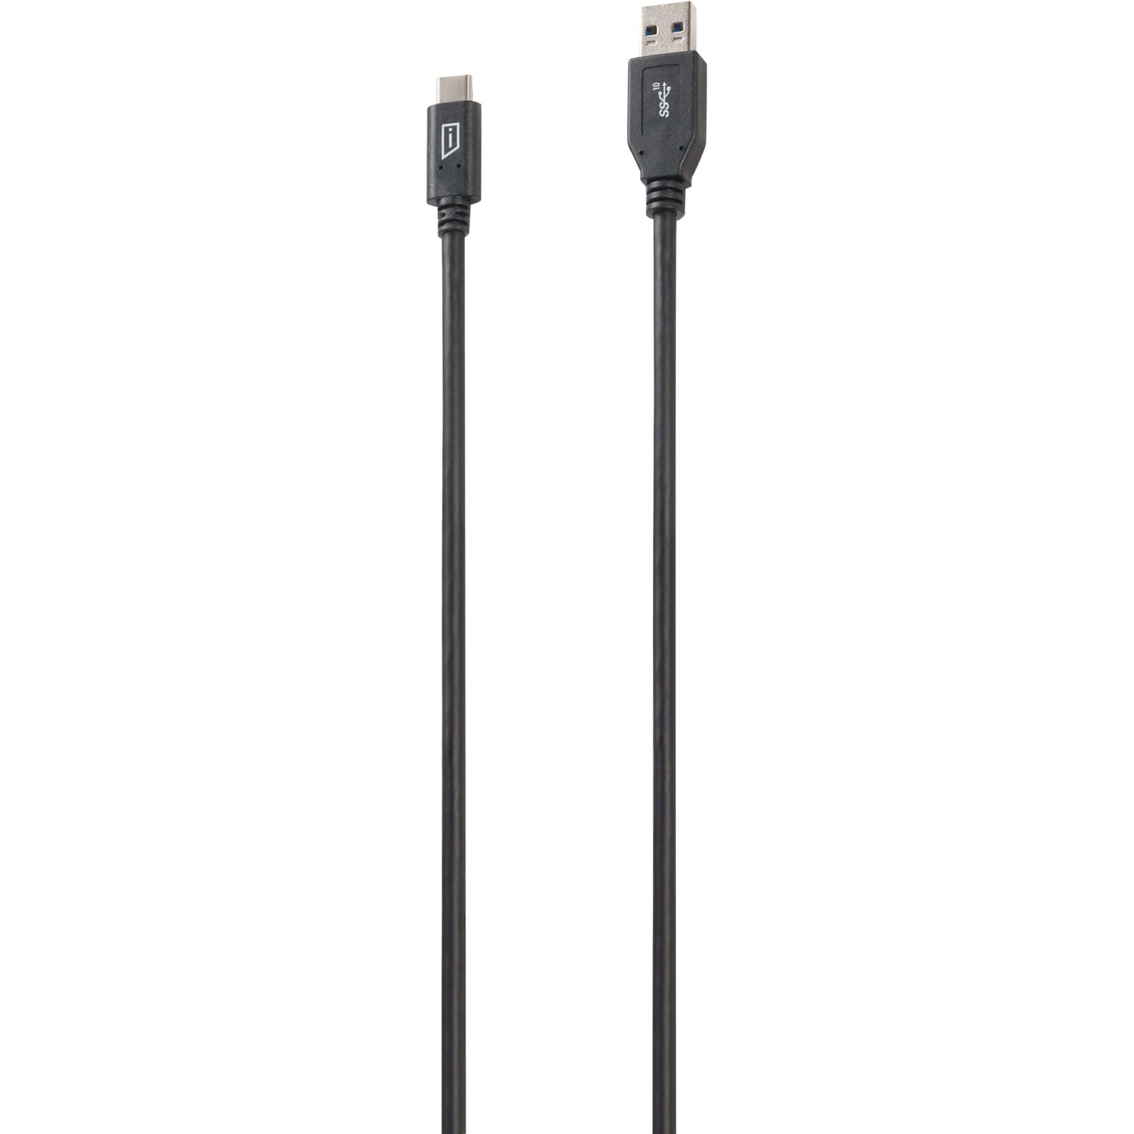 Targus iStore USB C to USB A Cable - Image 2 of 3